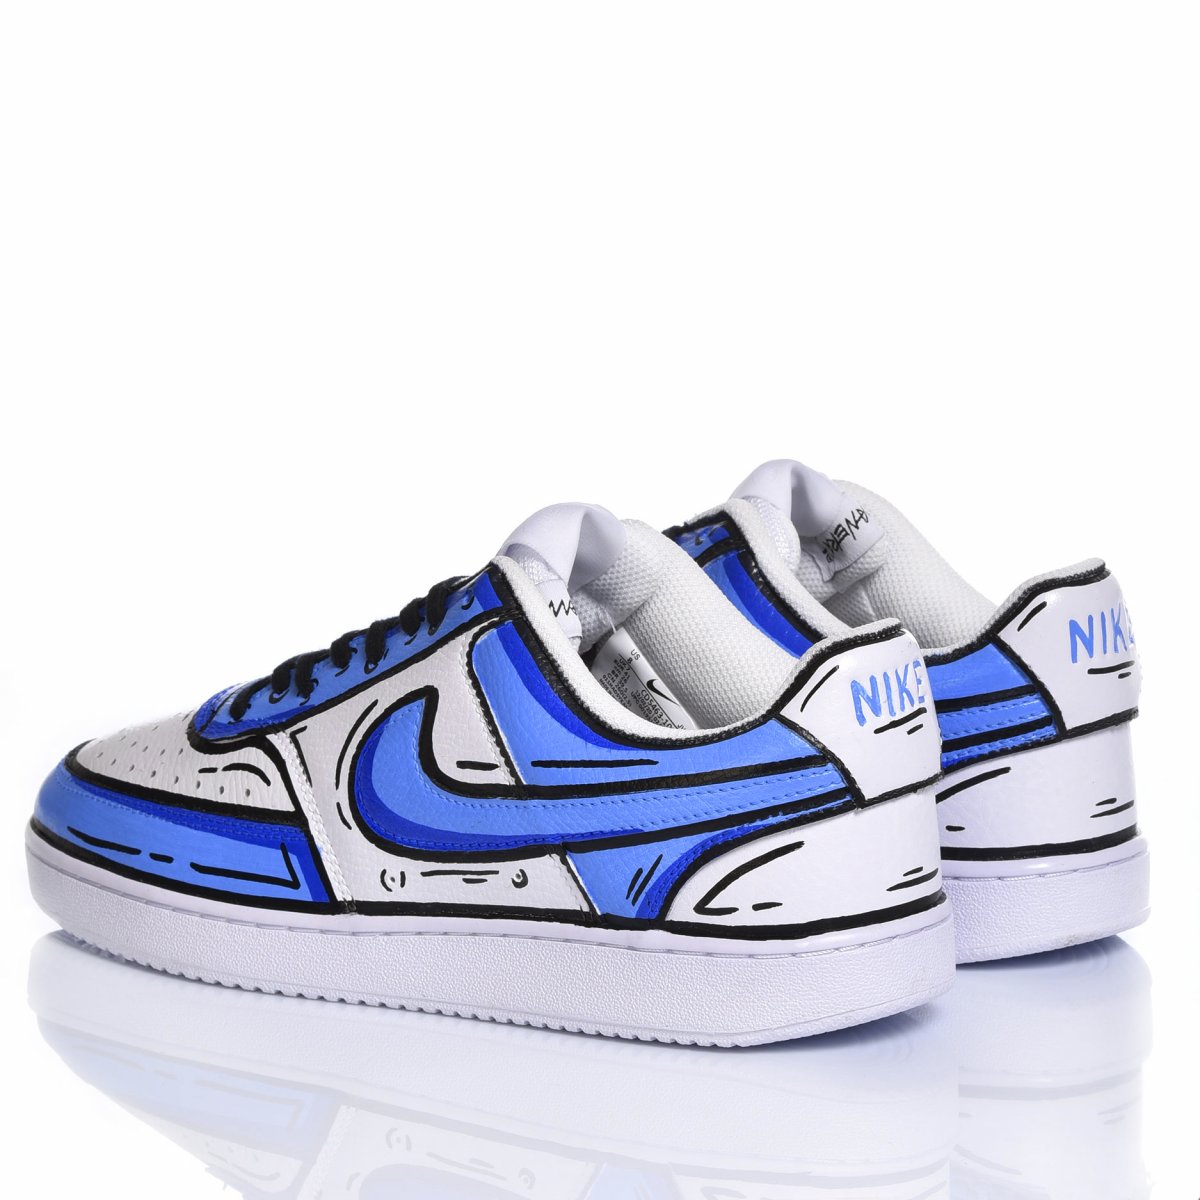 Nike Comics Moon Air force vision Special